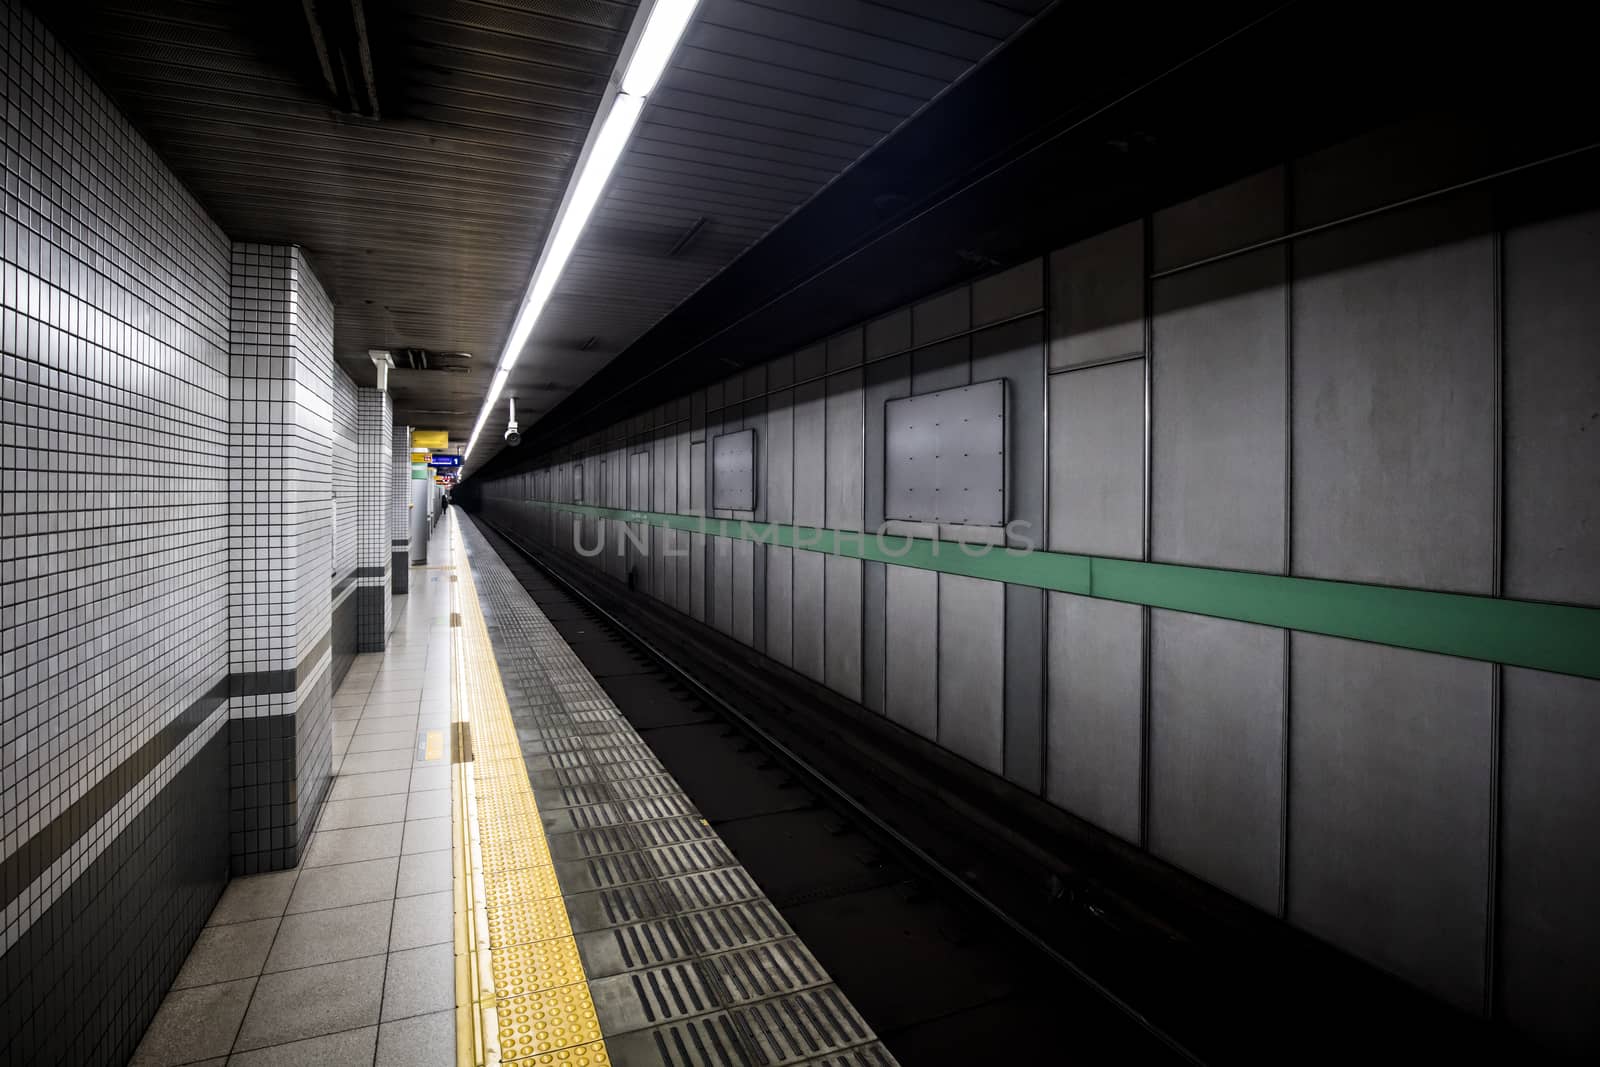 Kyoto, Japan - May 13 2019: The gritty interior and empty train platform of Sanjo Train Station in Kyoto, Japan